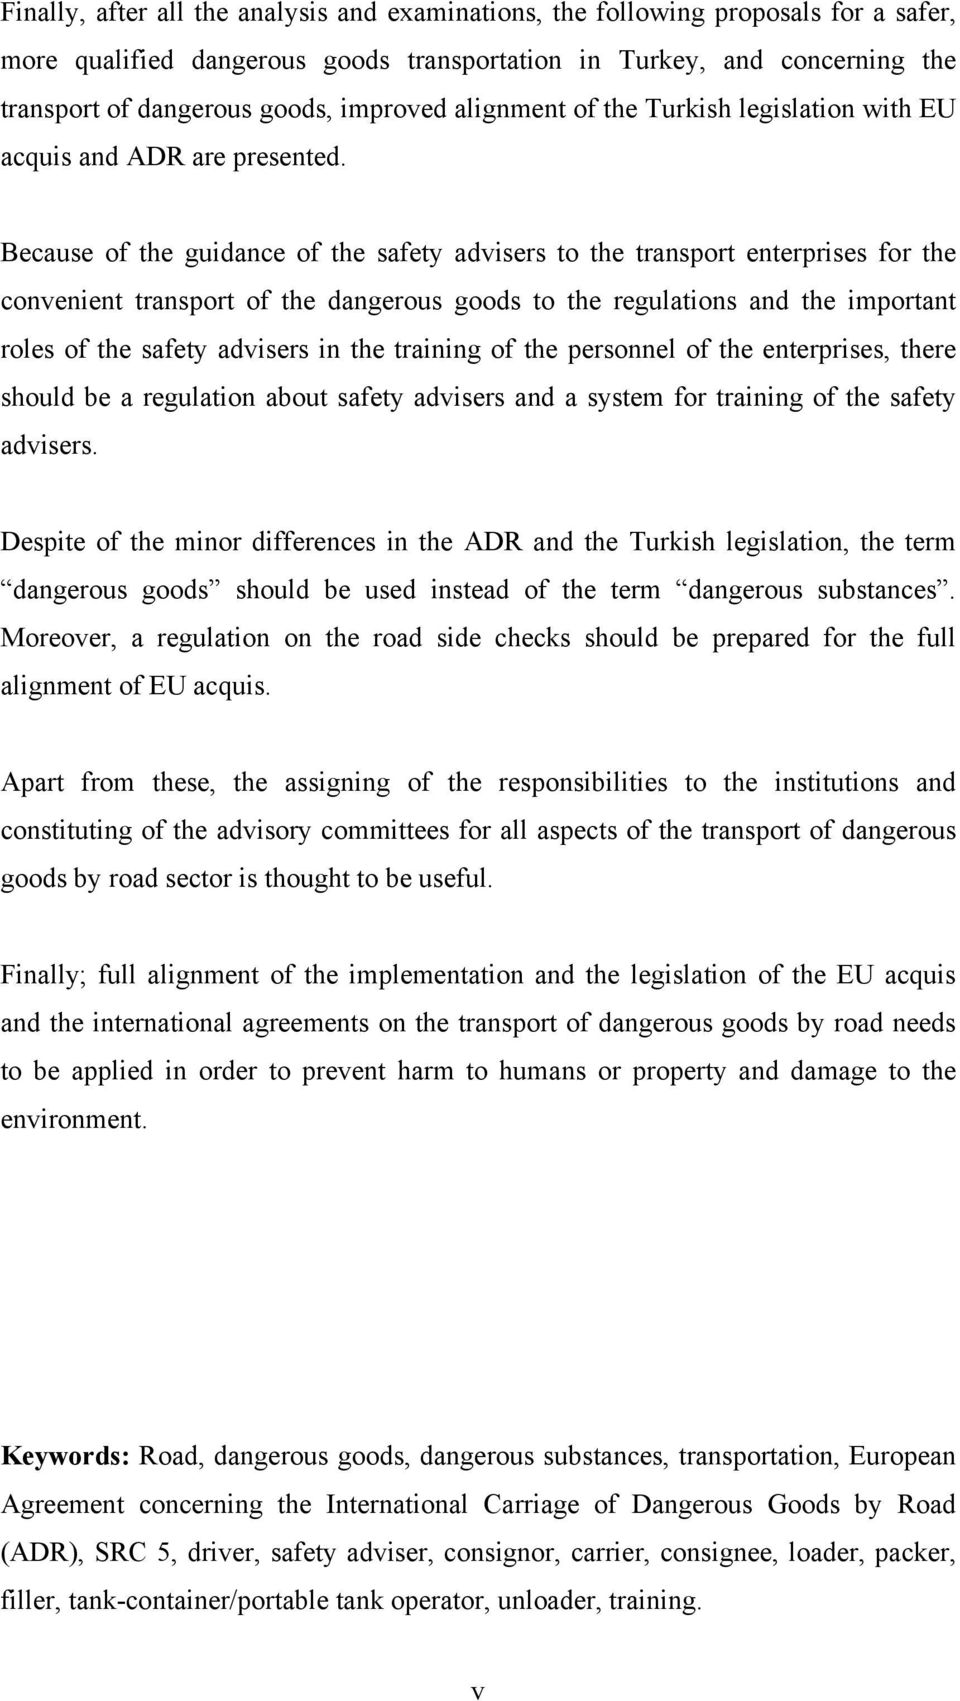 Because of the guidance of the safety advisers to the transport enterprises for the convenient transport of the dangerous goods to the regulations and the important roles of the safety advisers in